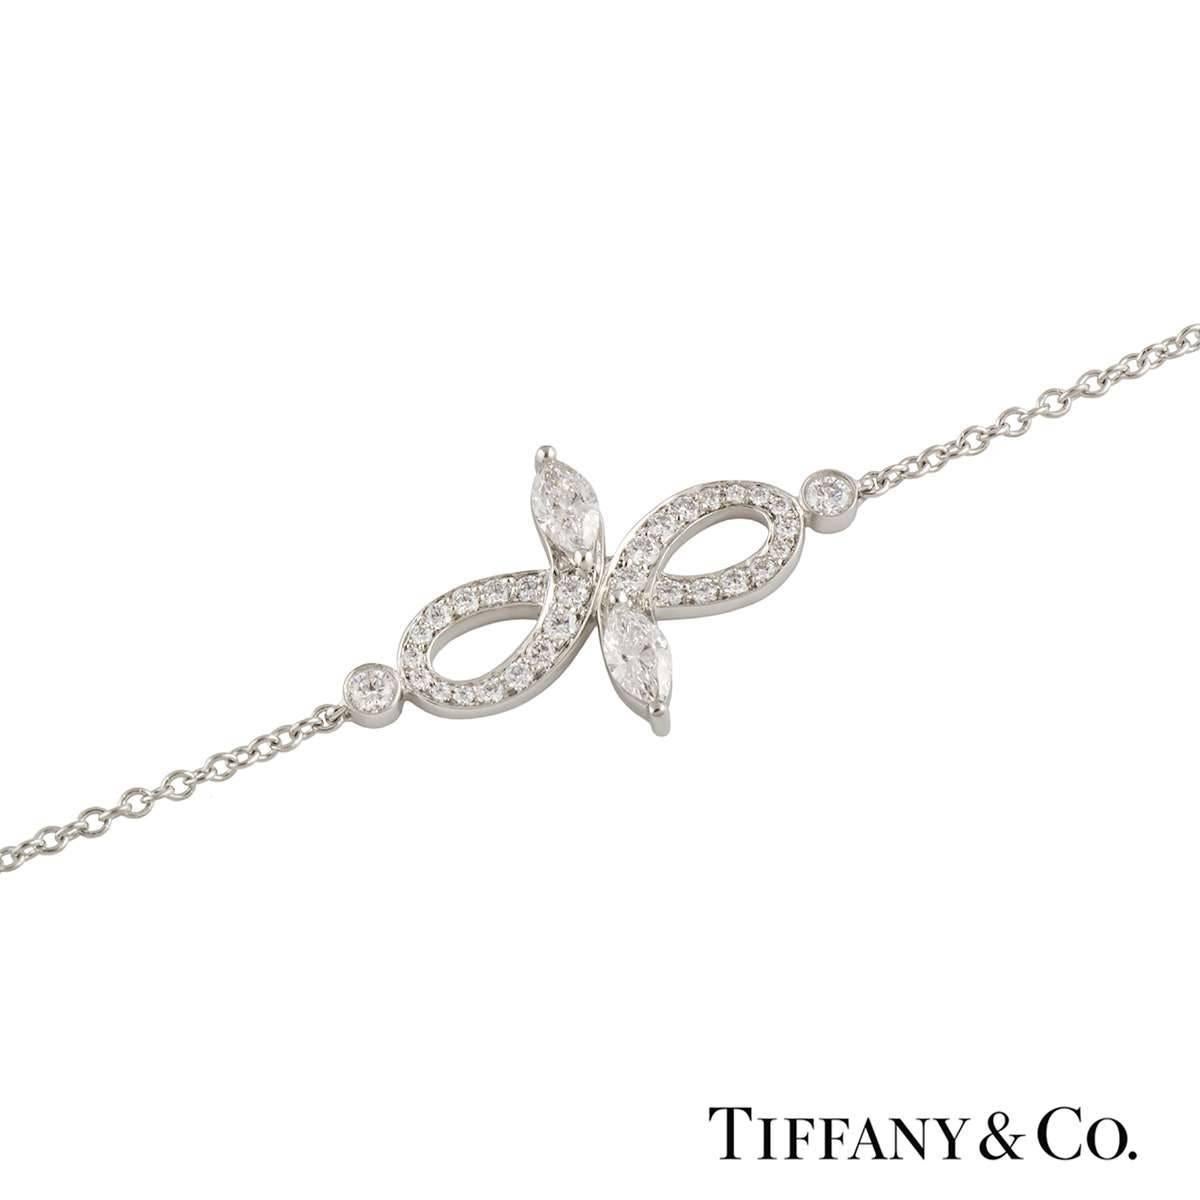 A beautiful 18k white gold Tiffany & Co. diamond bracelet from the Victoria collection. The bracelet comprises of an open work design with 2 marquise cut diamonds at each end with a total weight of 0.13ct, F colour and VS+ clarity. Complementing the